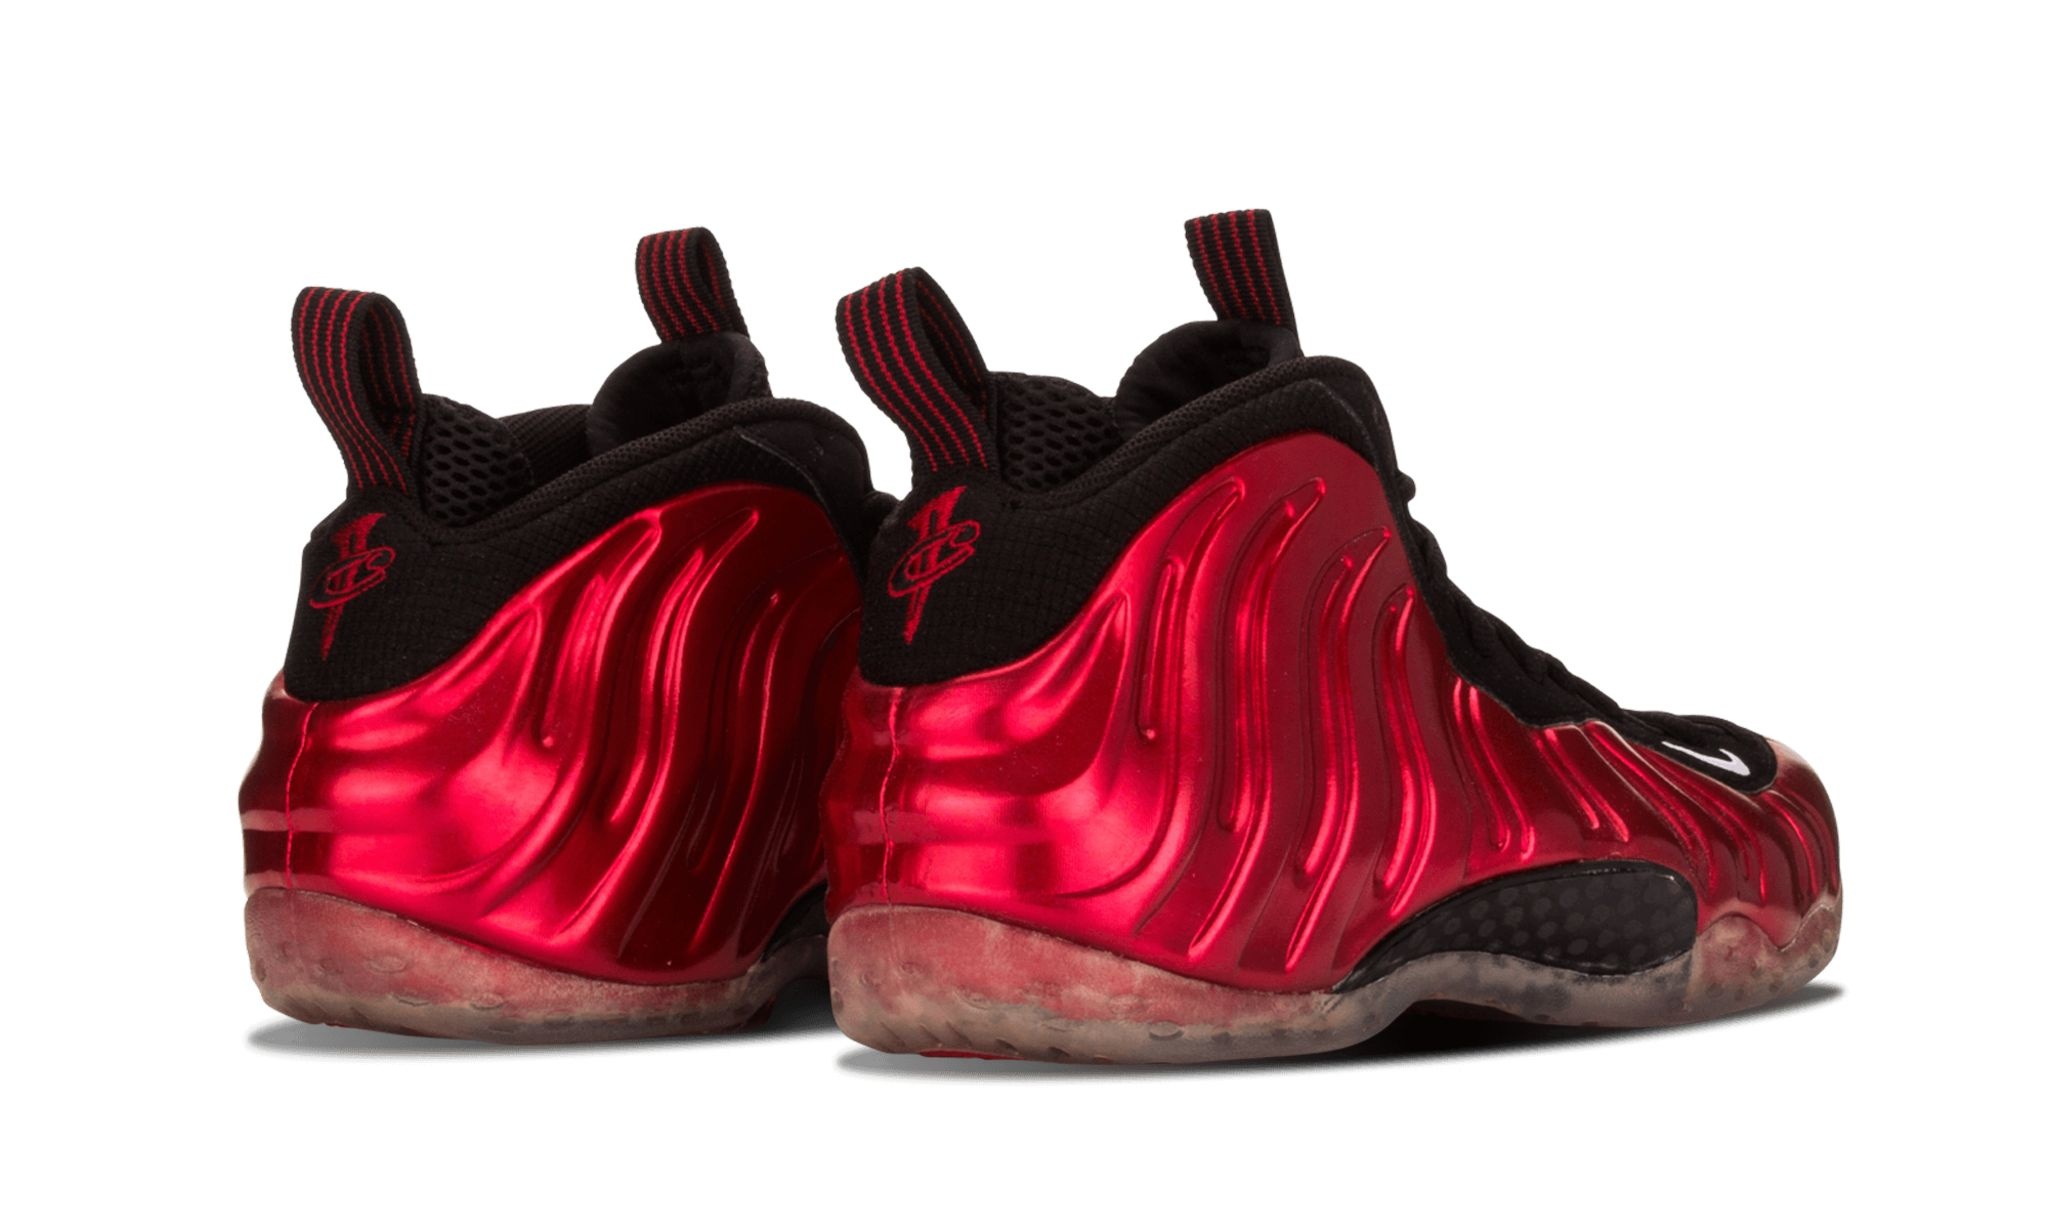 Air Foamposite One "Metallic Red" - 3